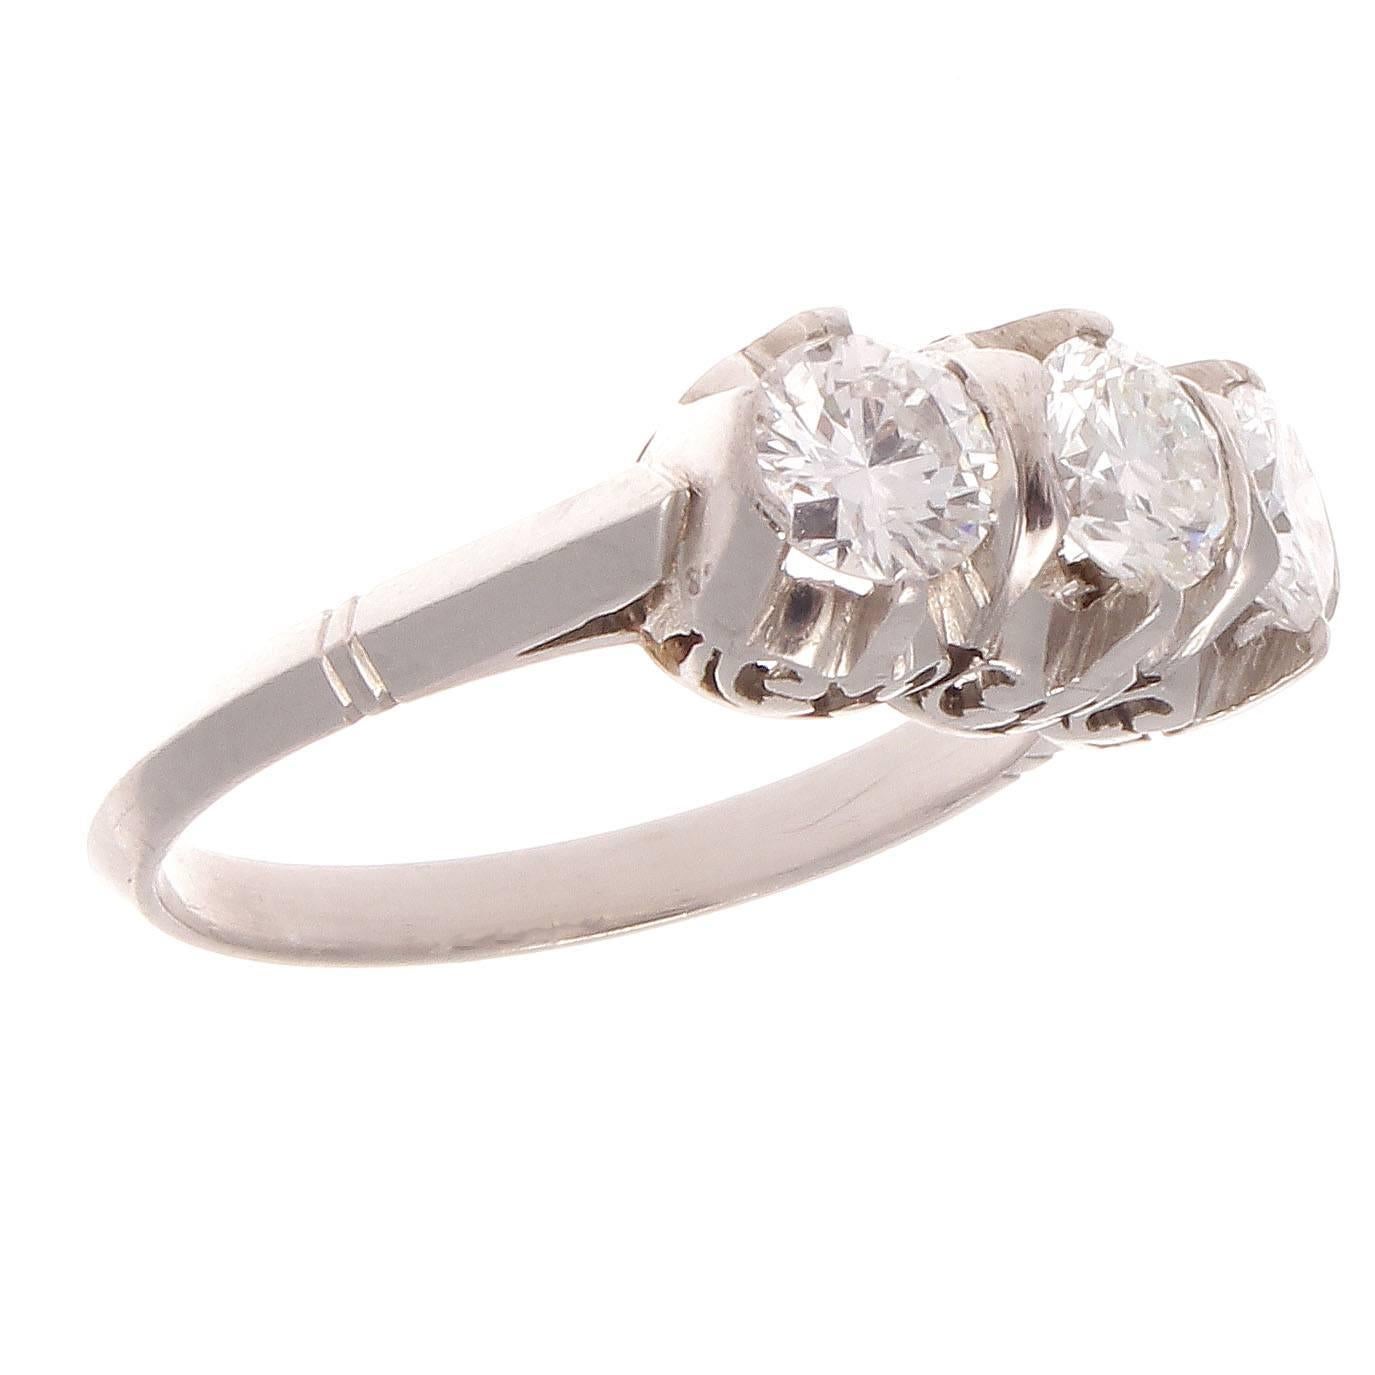 Inspired by the golden era of jewelry this wedding ring is timeless and will last the marriage in style with fond memories of the life changing event. Featuring 3 near colorless diamonds uplifted by swirling contours of hand crafted platinum.

Ring